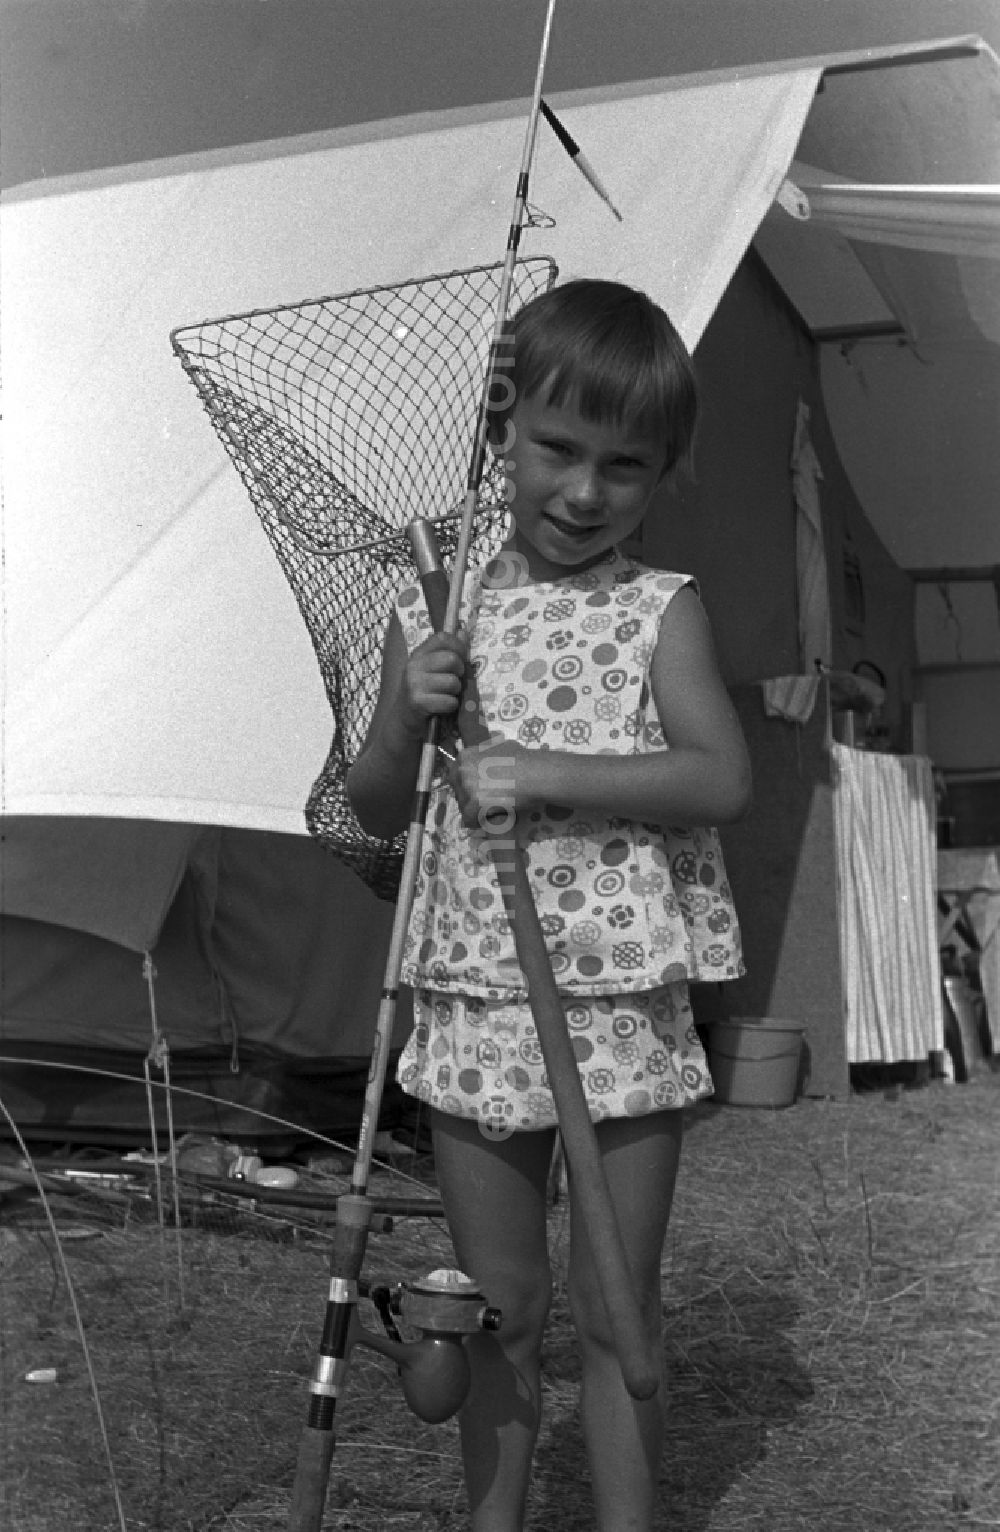 GDR picture archive: Neuruppin OT Stendenitz - A little girl with fishing rod and landing net in front of a tent in Brandenburg